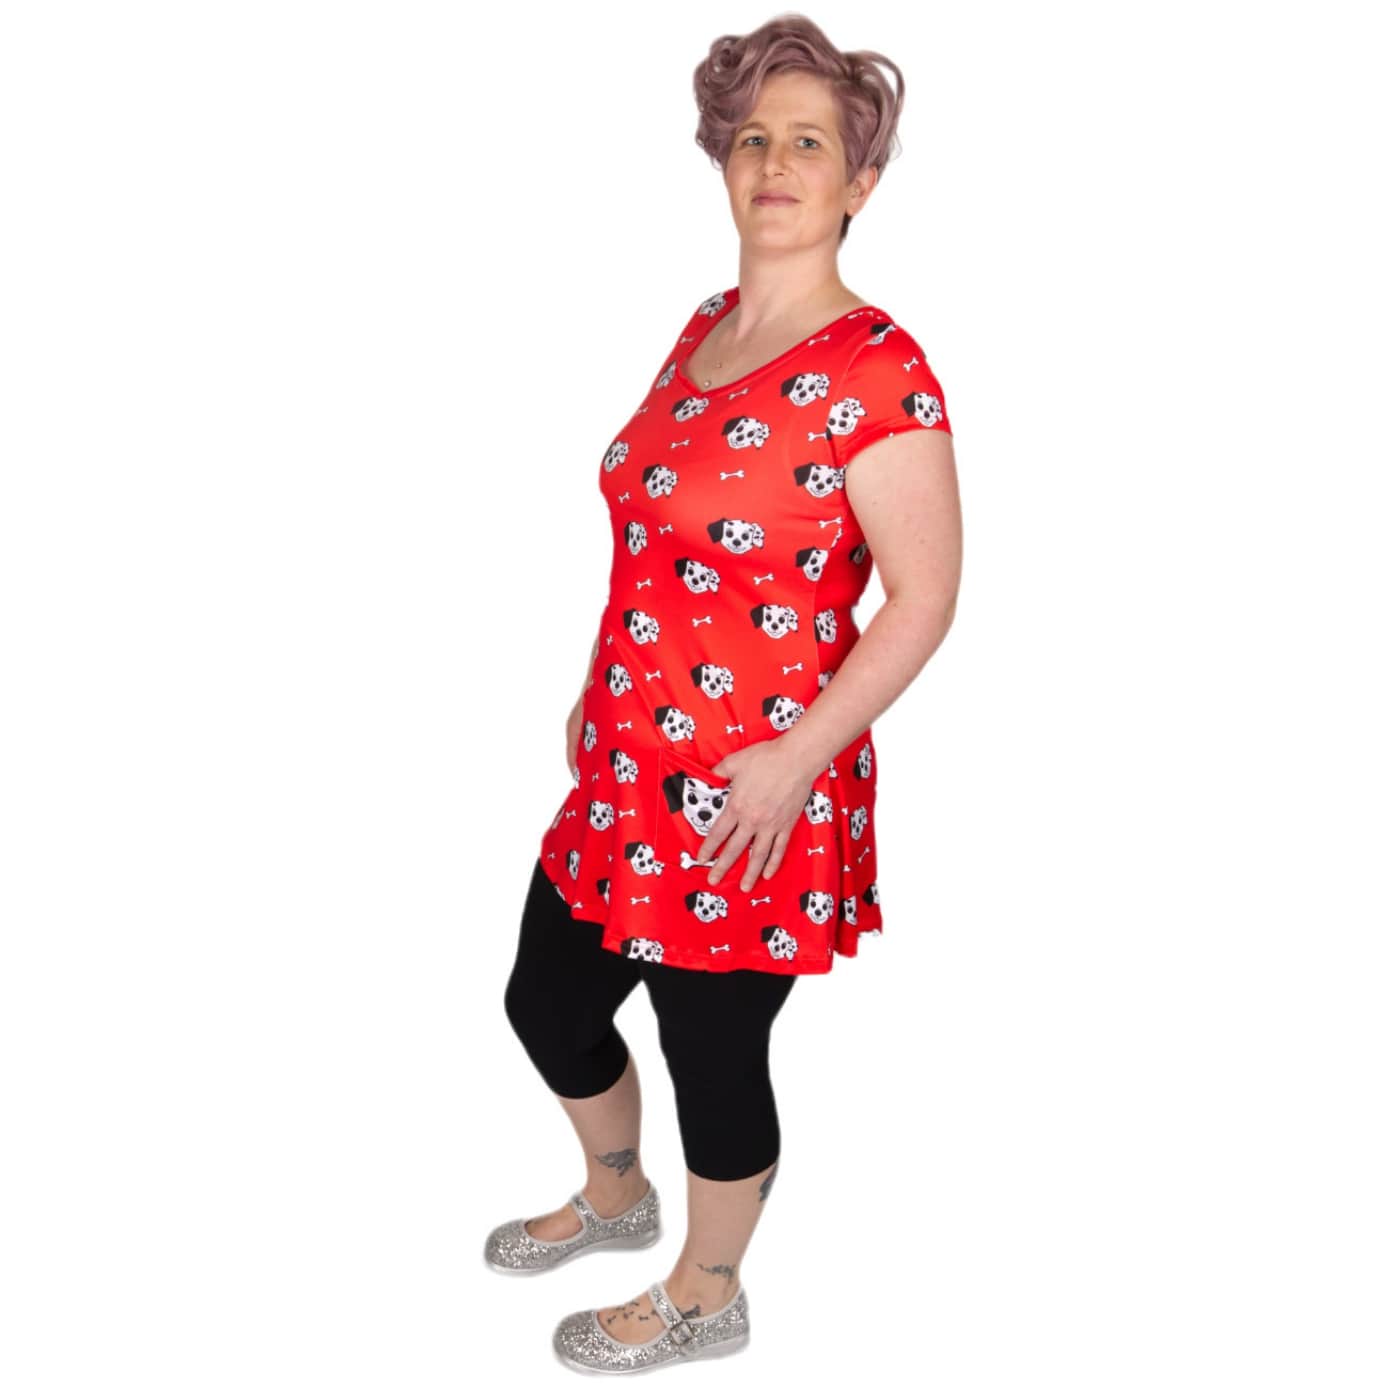 Puppy LoveTunic Top by RainbowsAndFairies.com.au (Dalmation Dog - Dog Bone - Fire Engine Red - Vintage Inspired - Kitsch - Top With Pockets - Mod) - SKU: CL_TUNIC_PUPPY_ORG - Pic-02